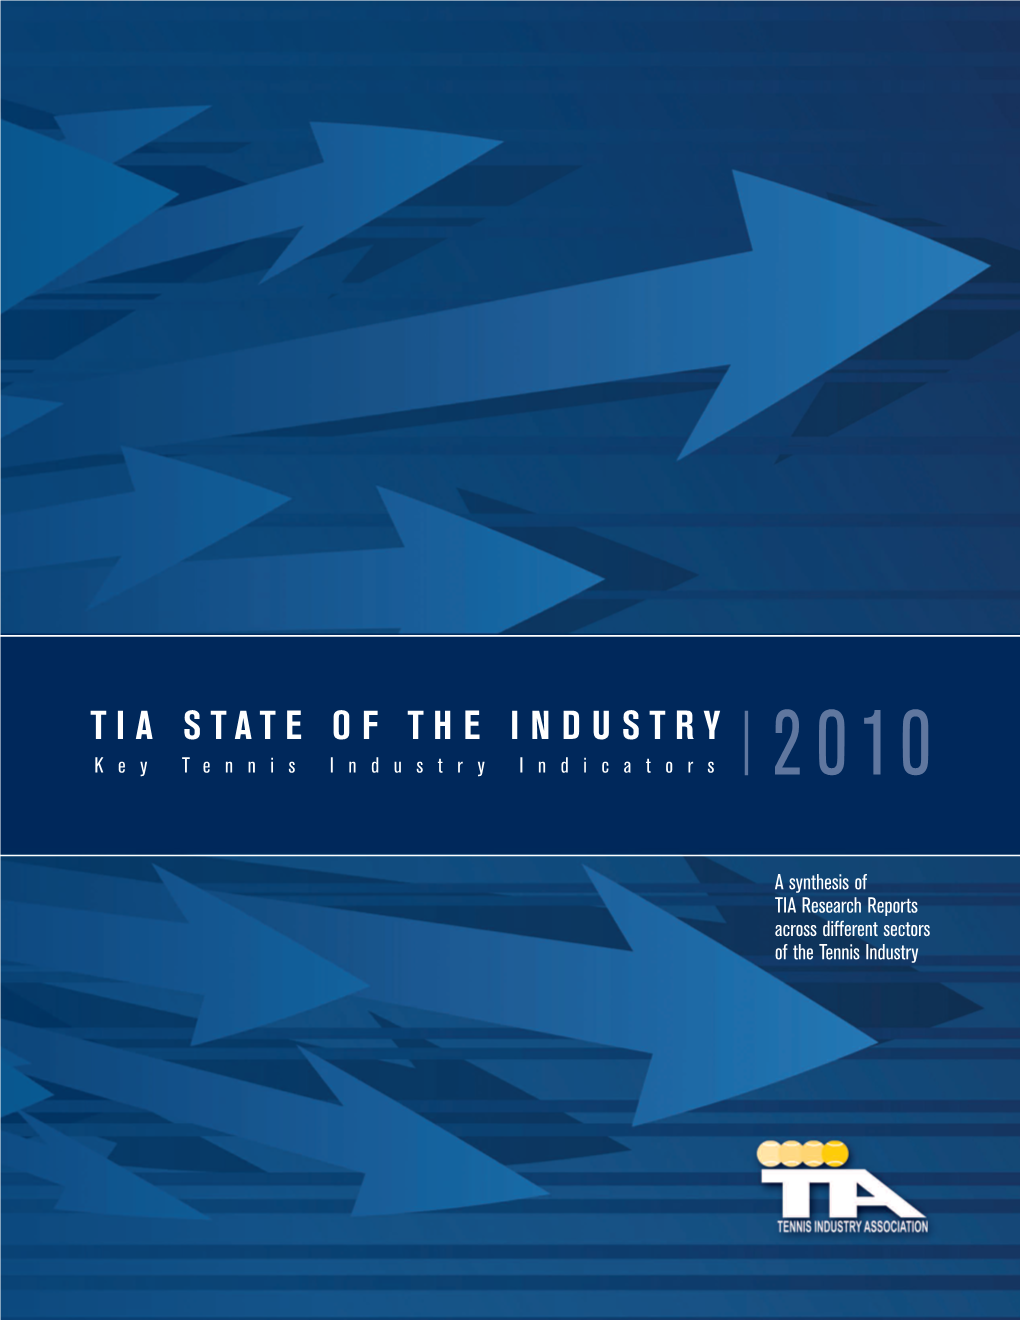 Tia State of the Industry